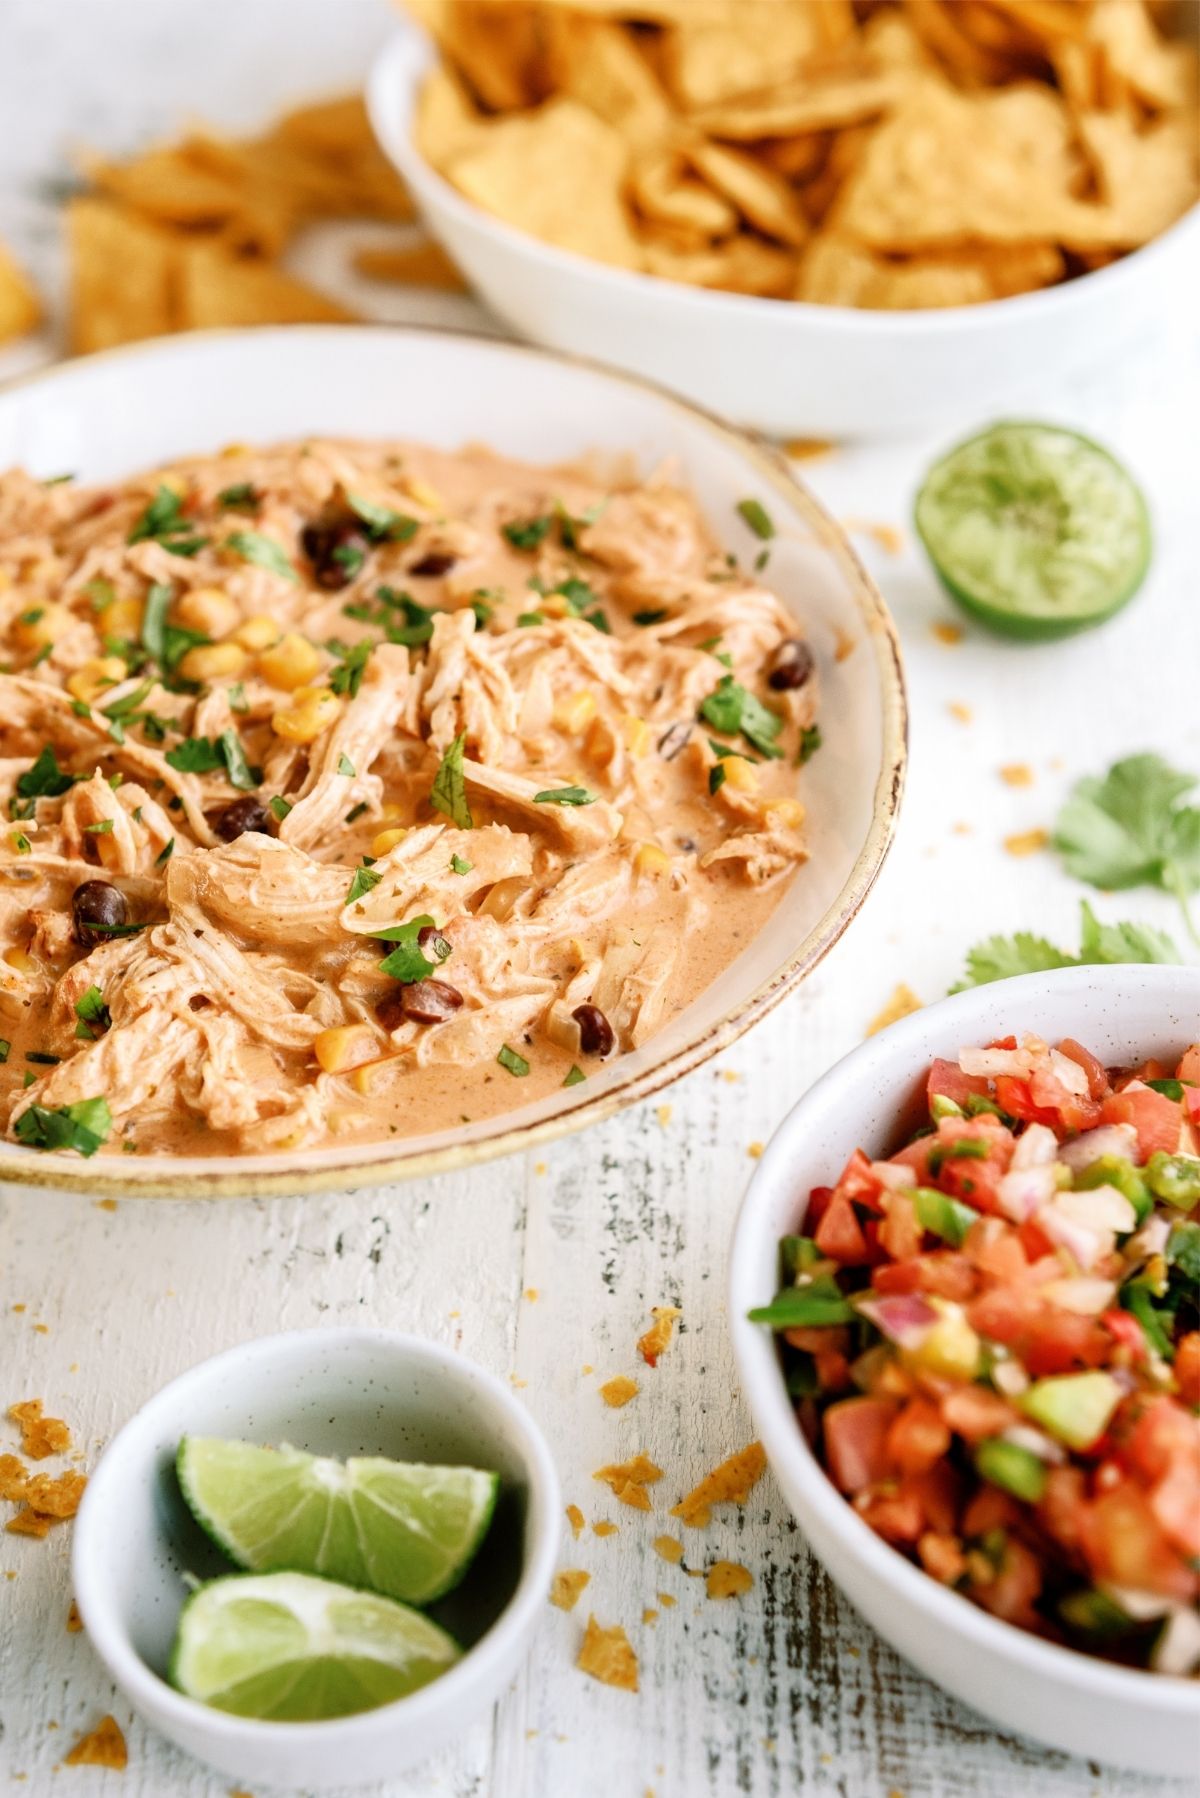 Instant Pot Creamy Fiesta Chicken in a bowl with chips, pico and limes on the side